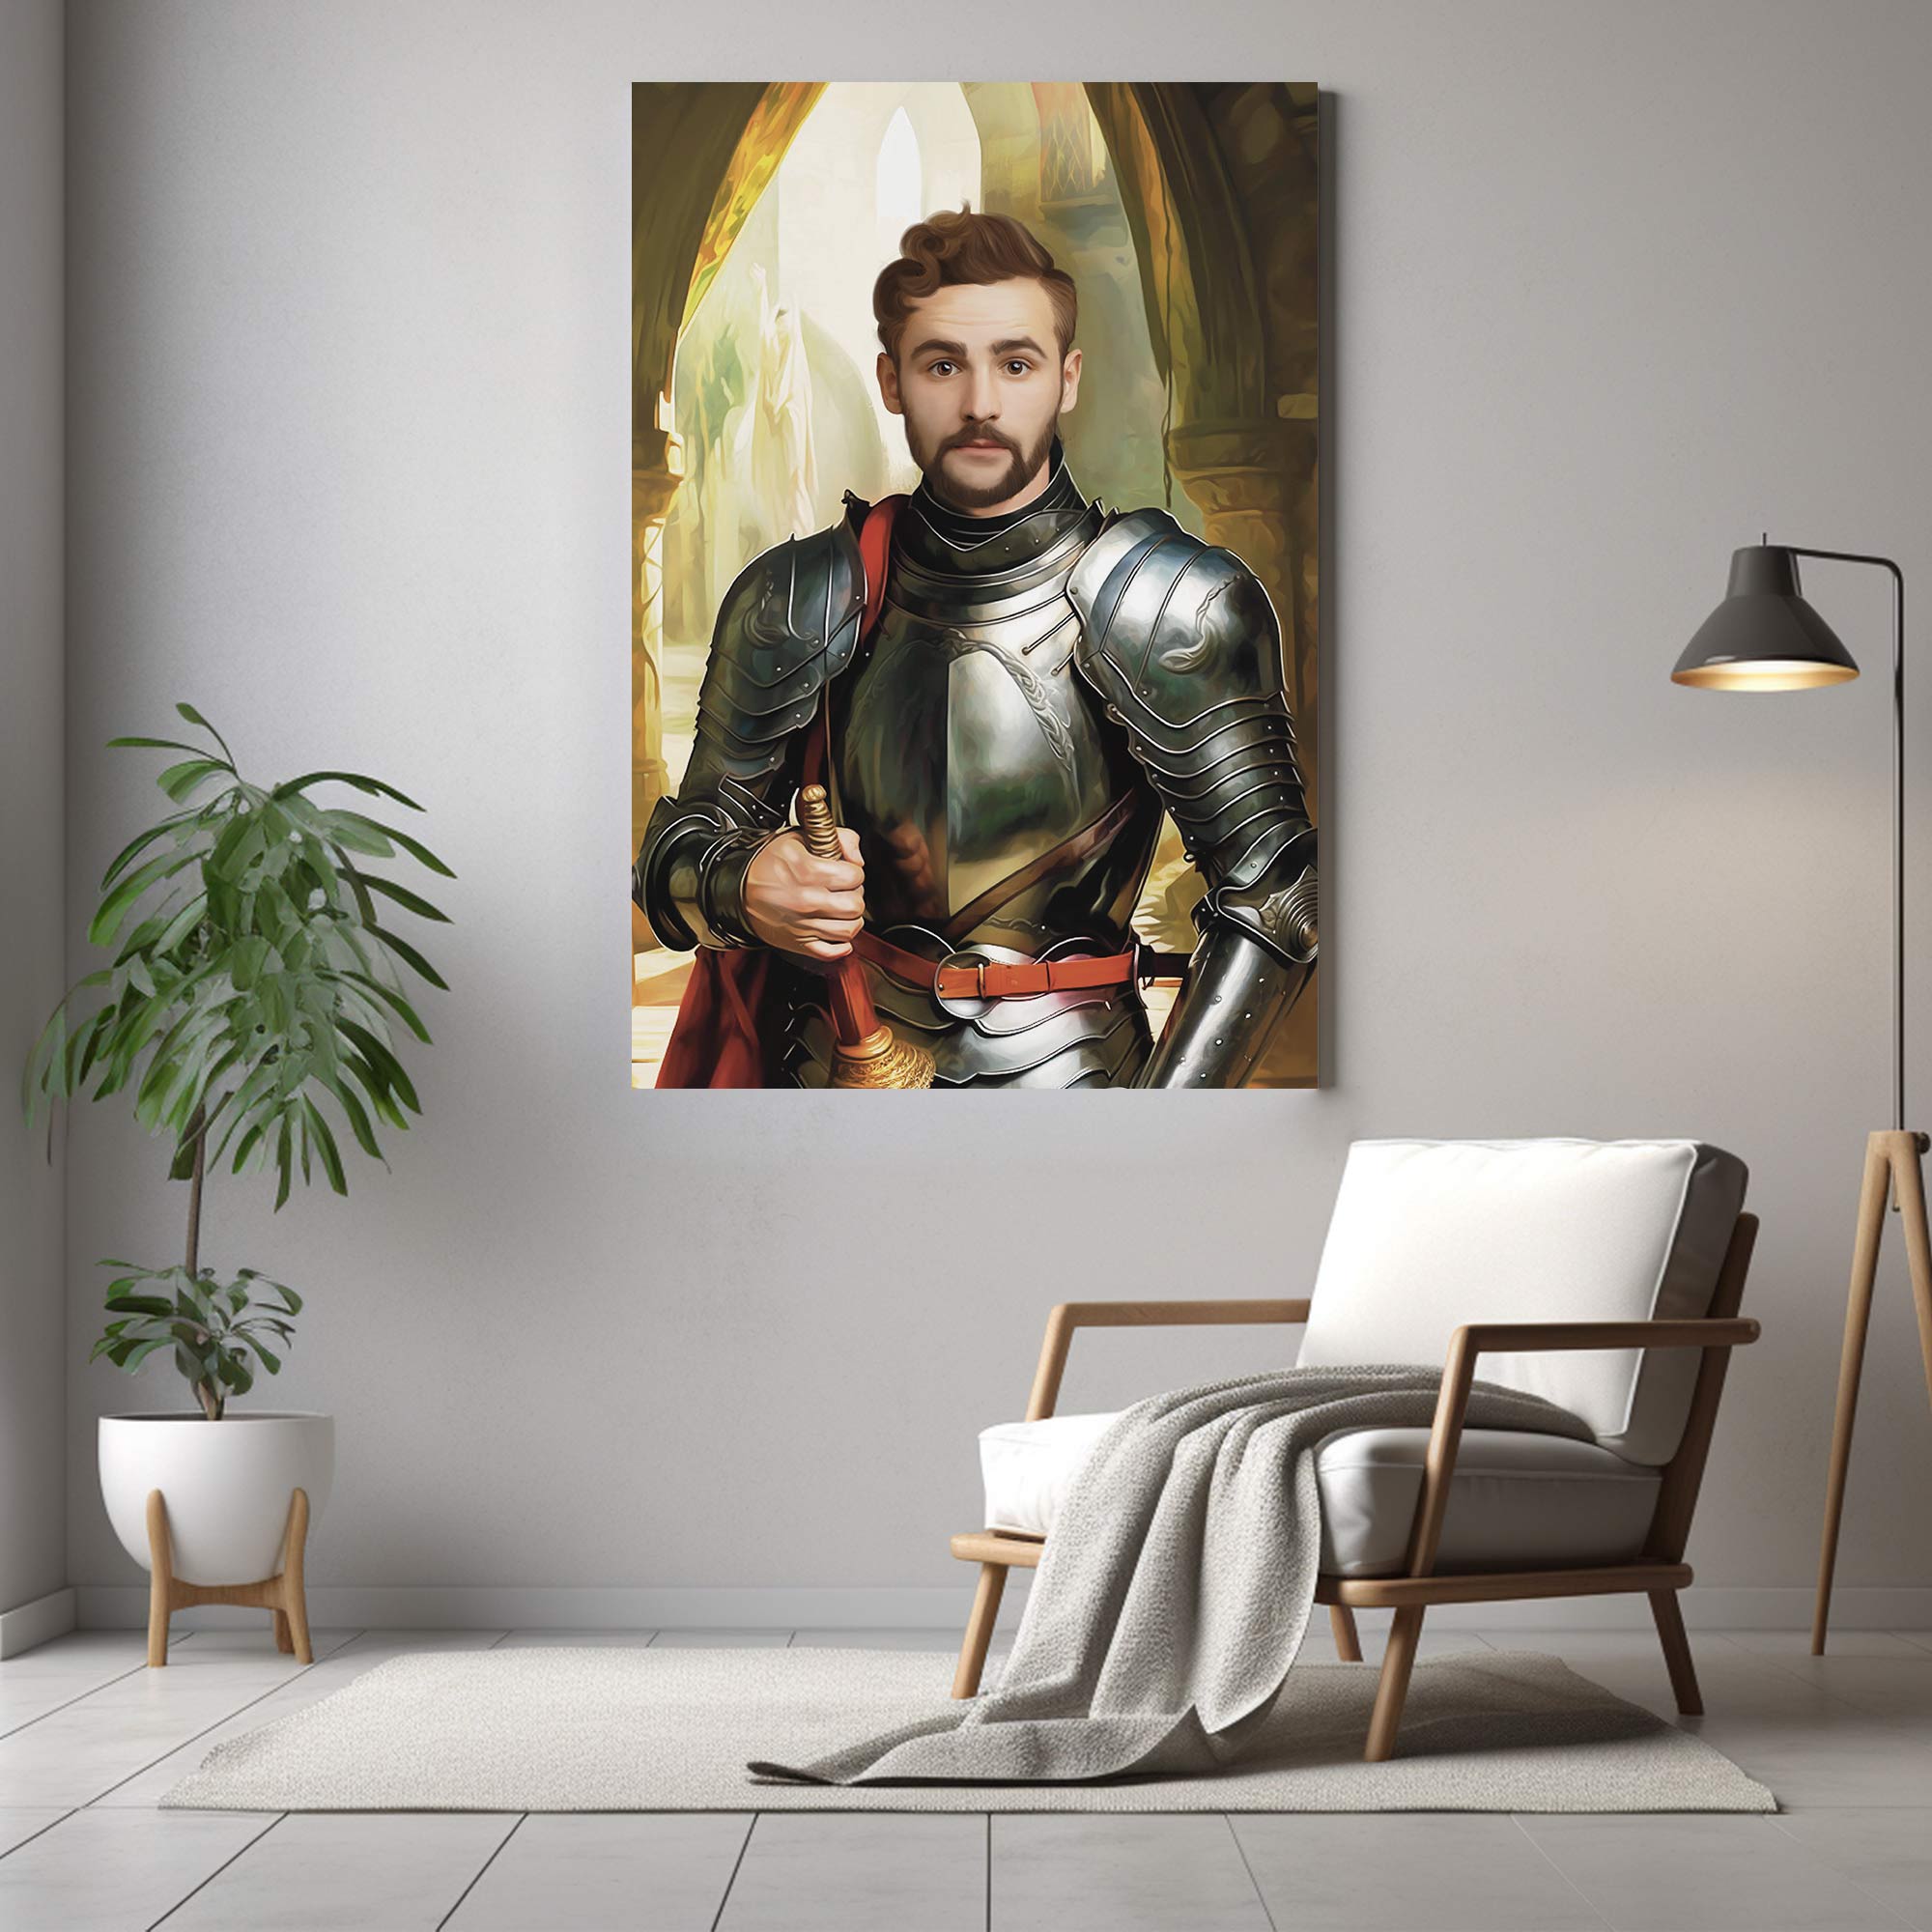 knight portraits on the wall image